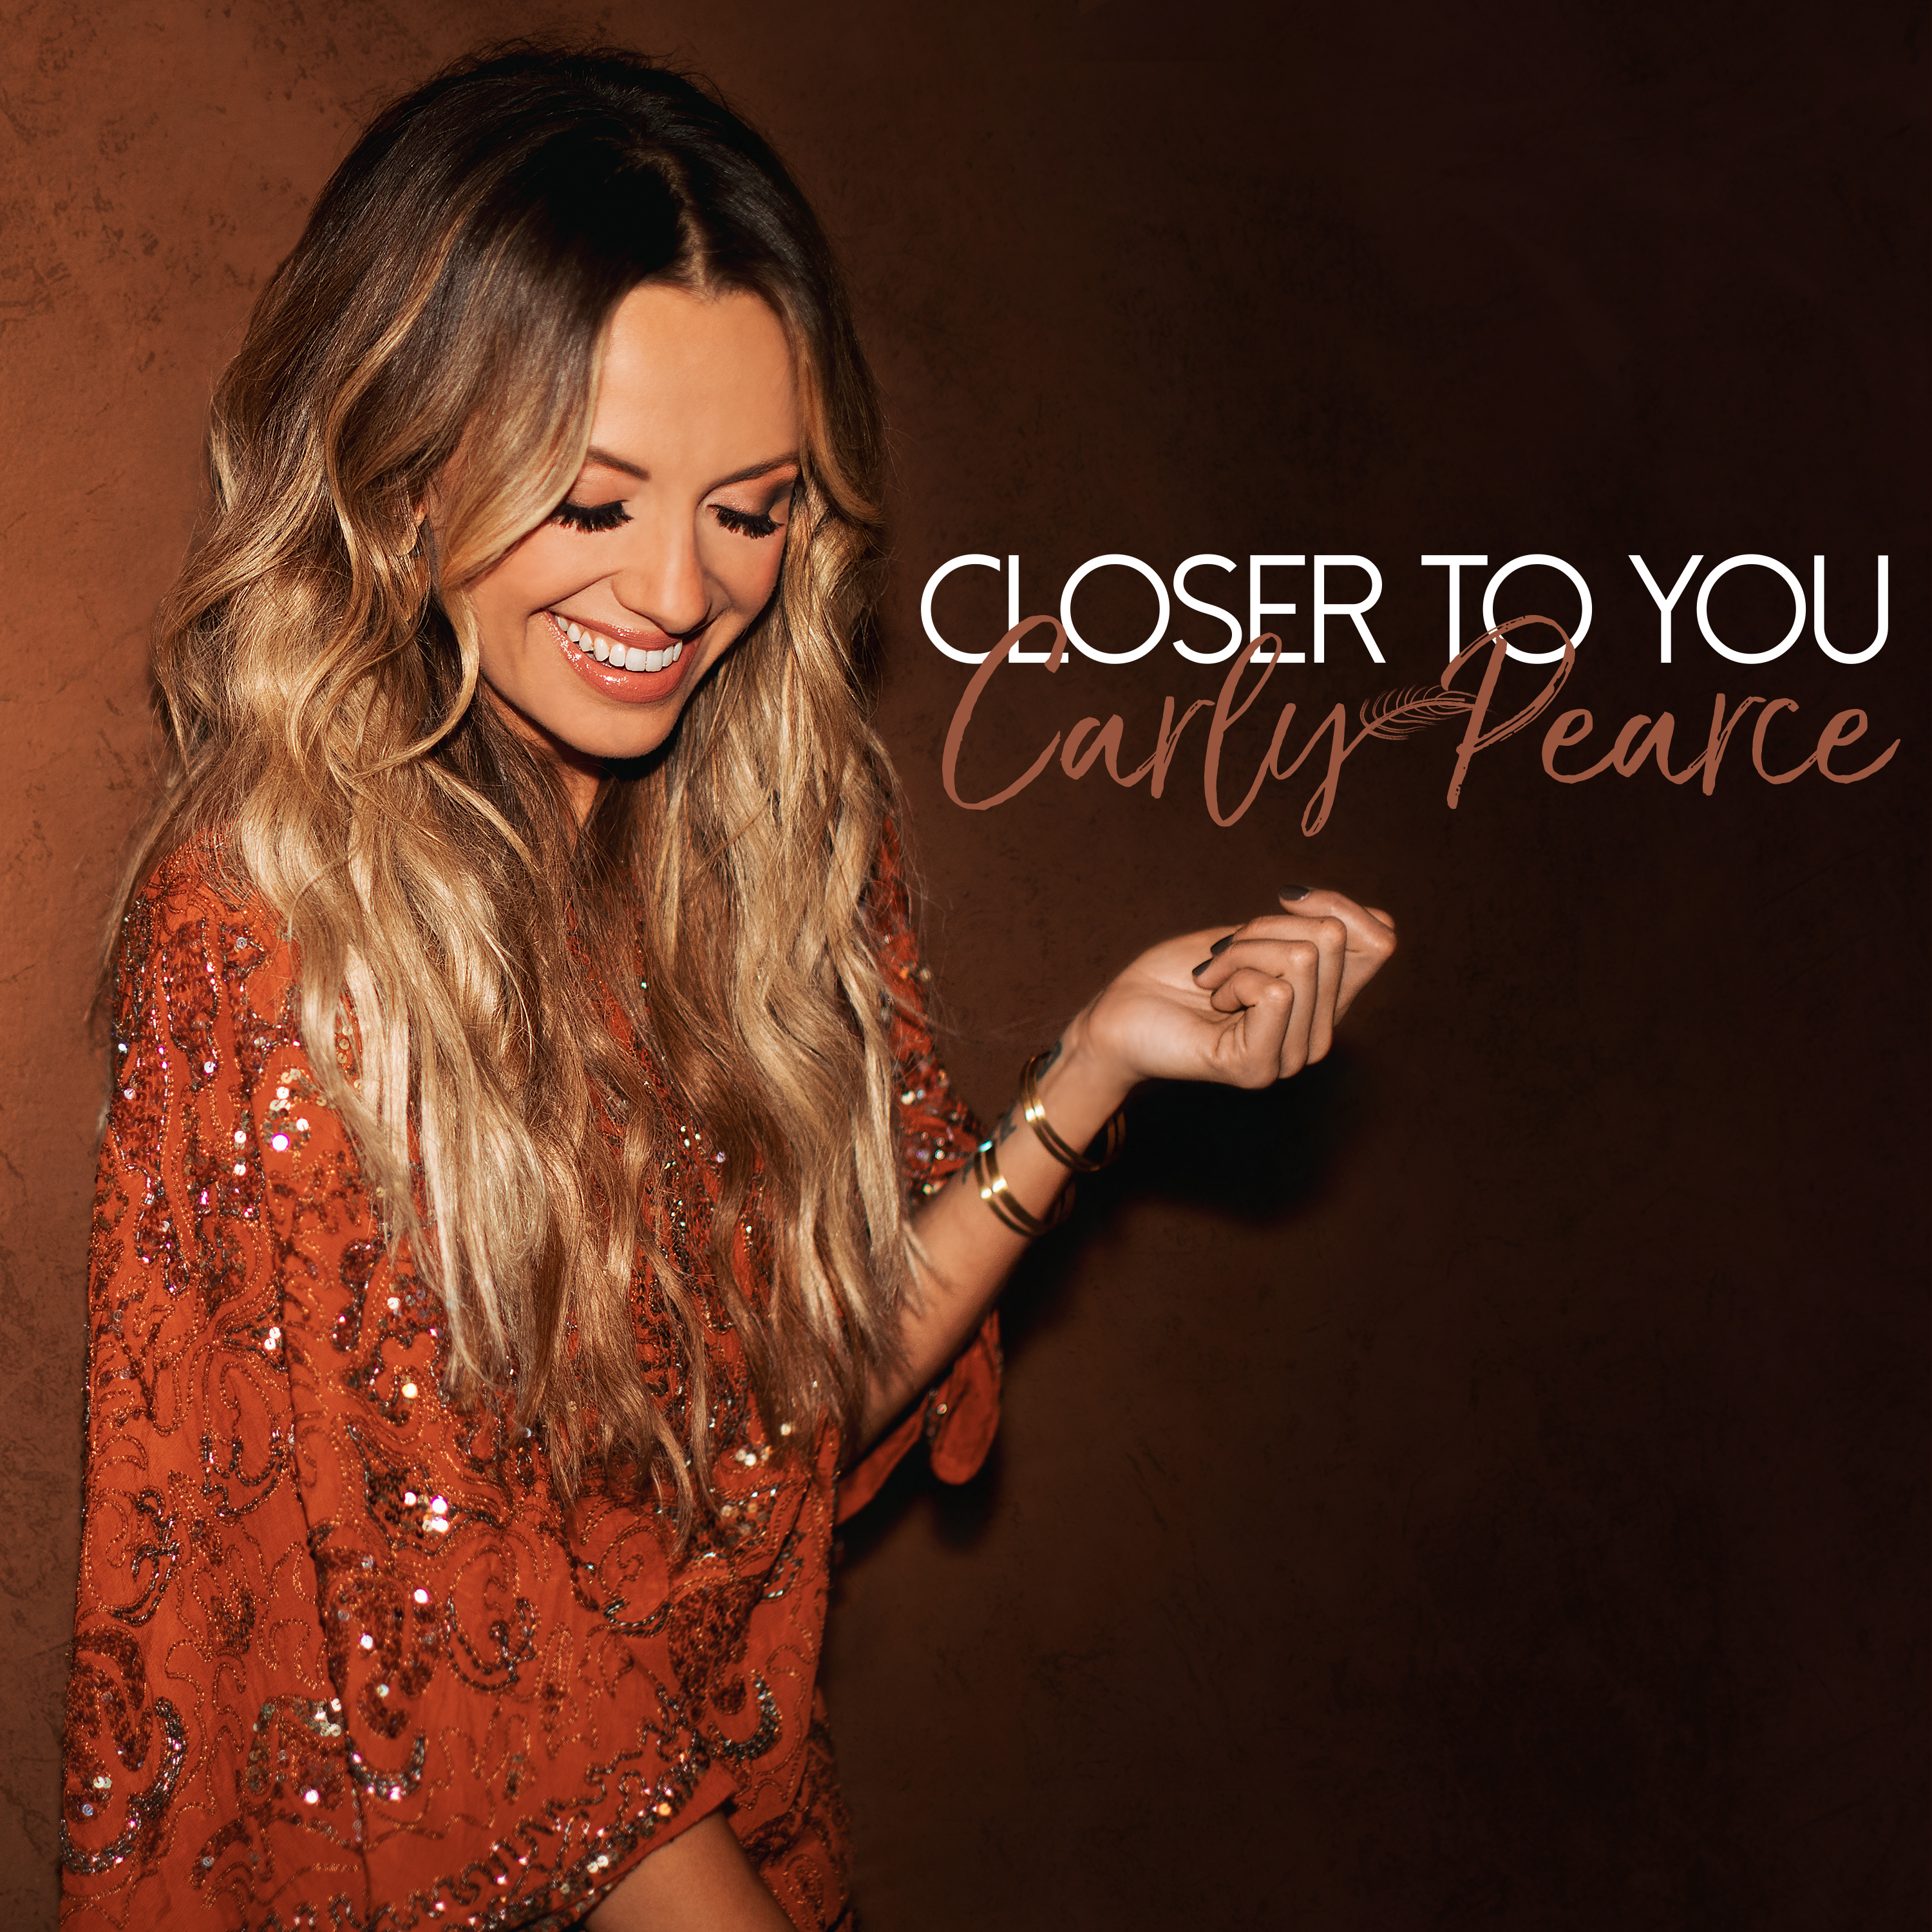 KICK IT OR KEEP IT: “Closer To You”